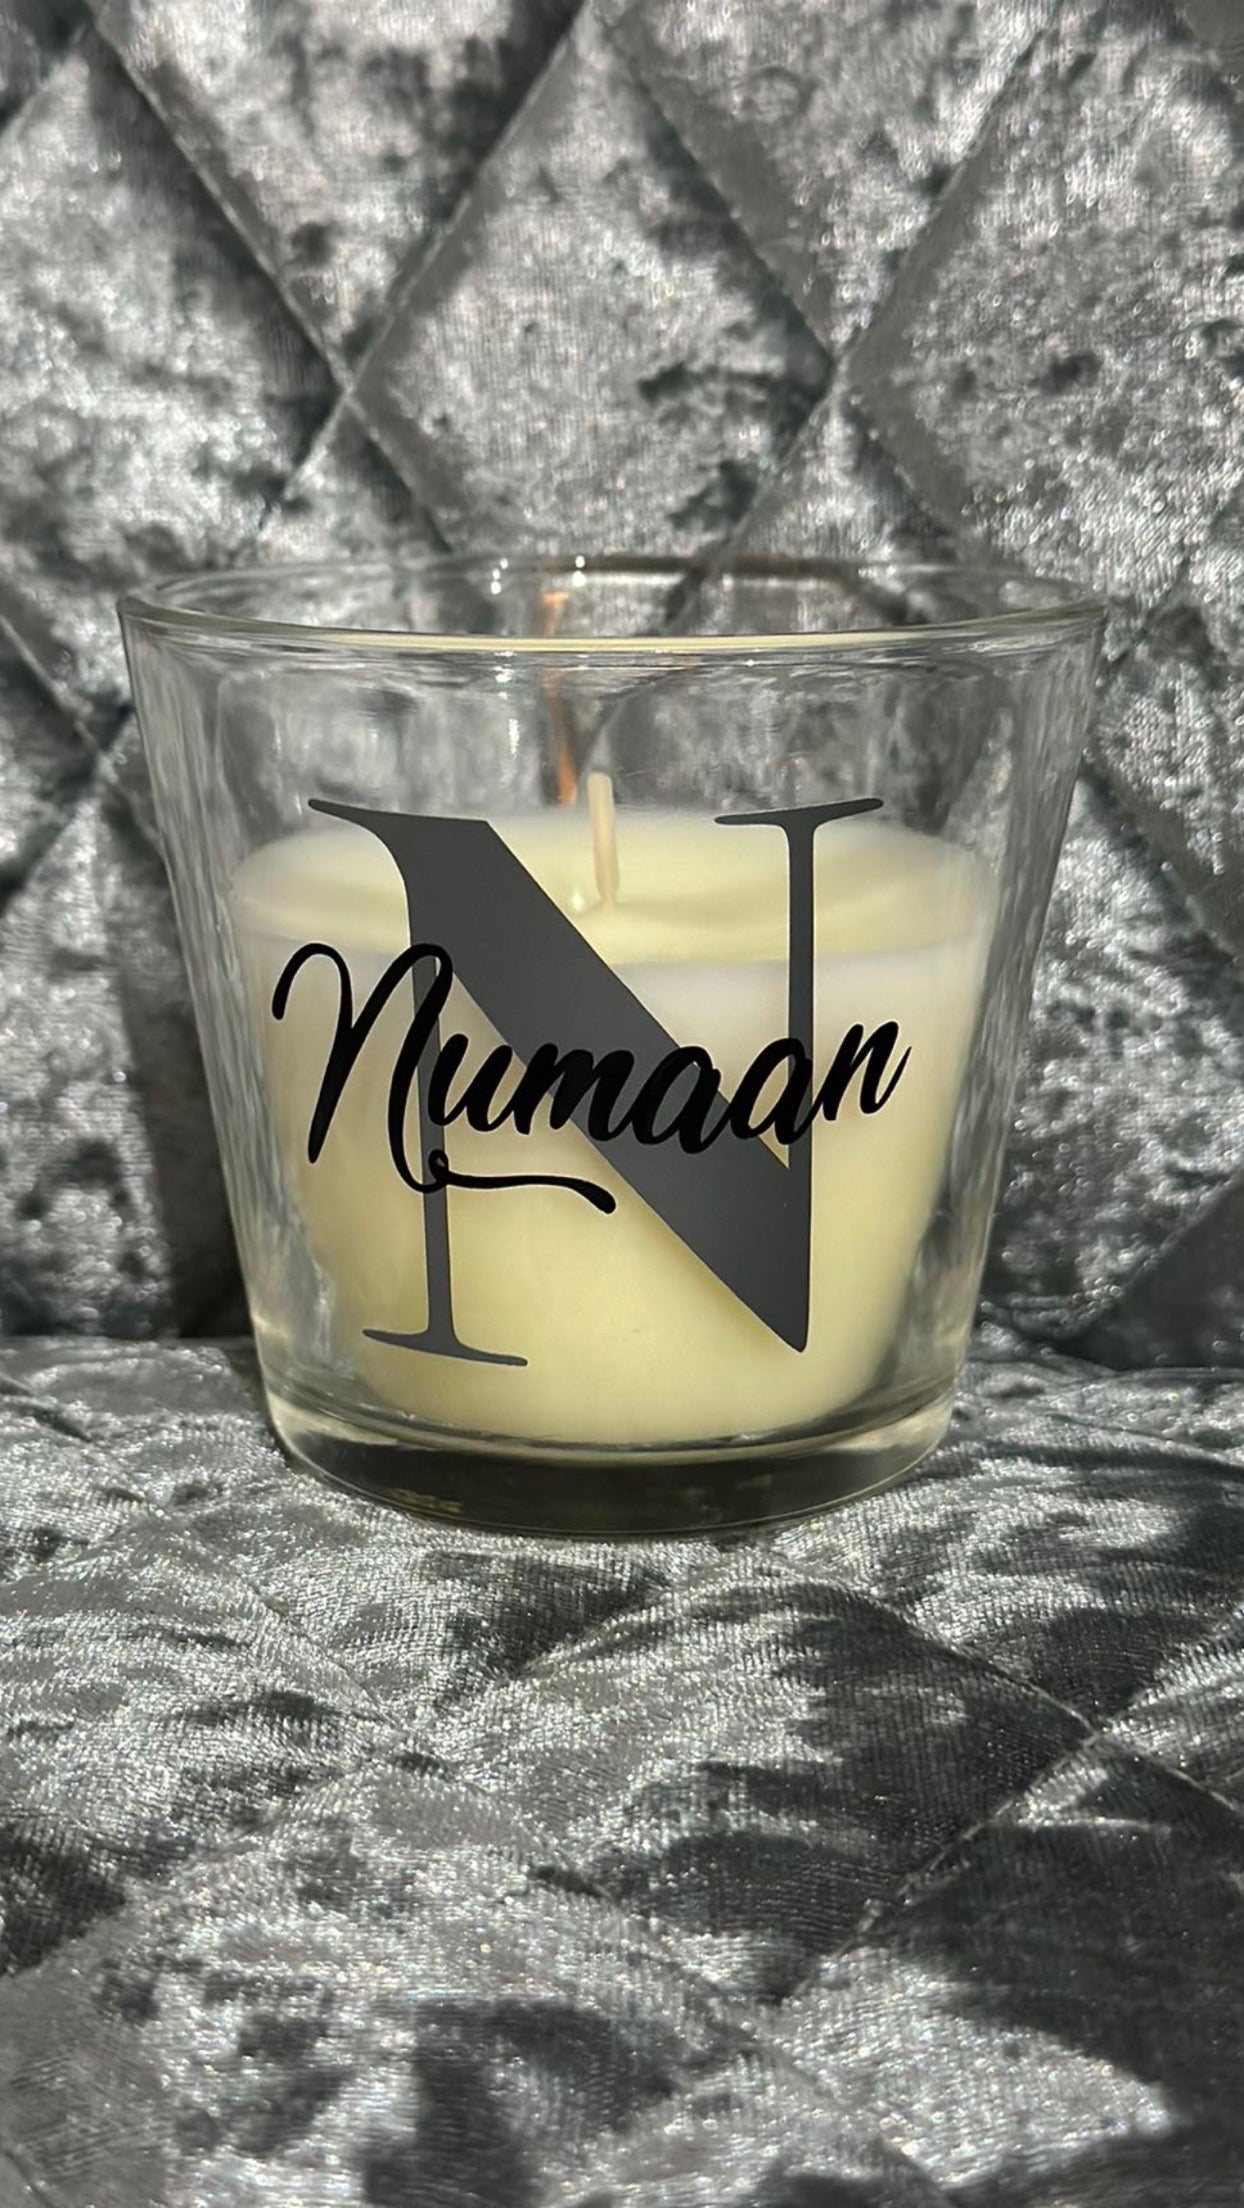 Personalised candles